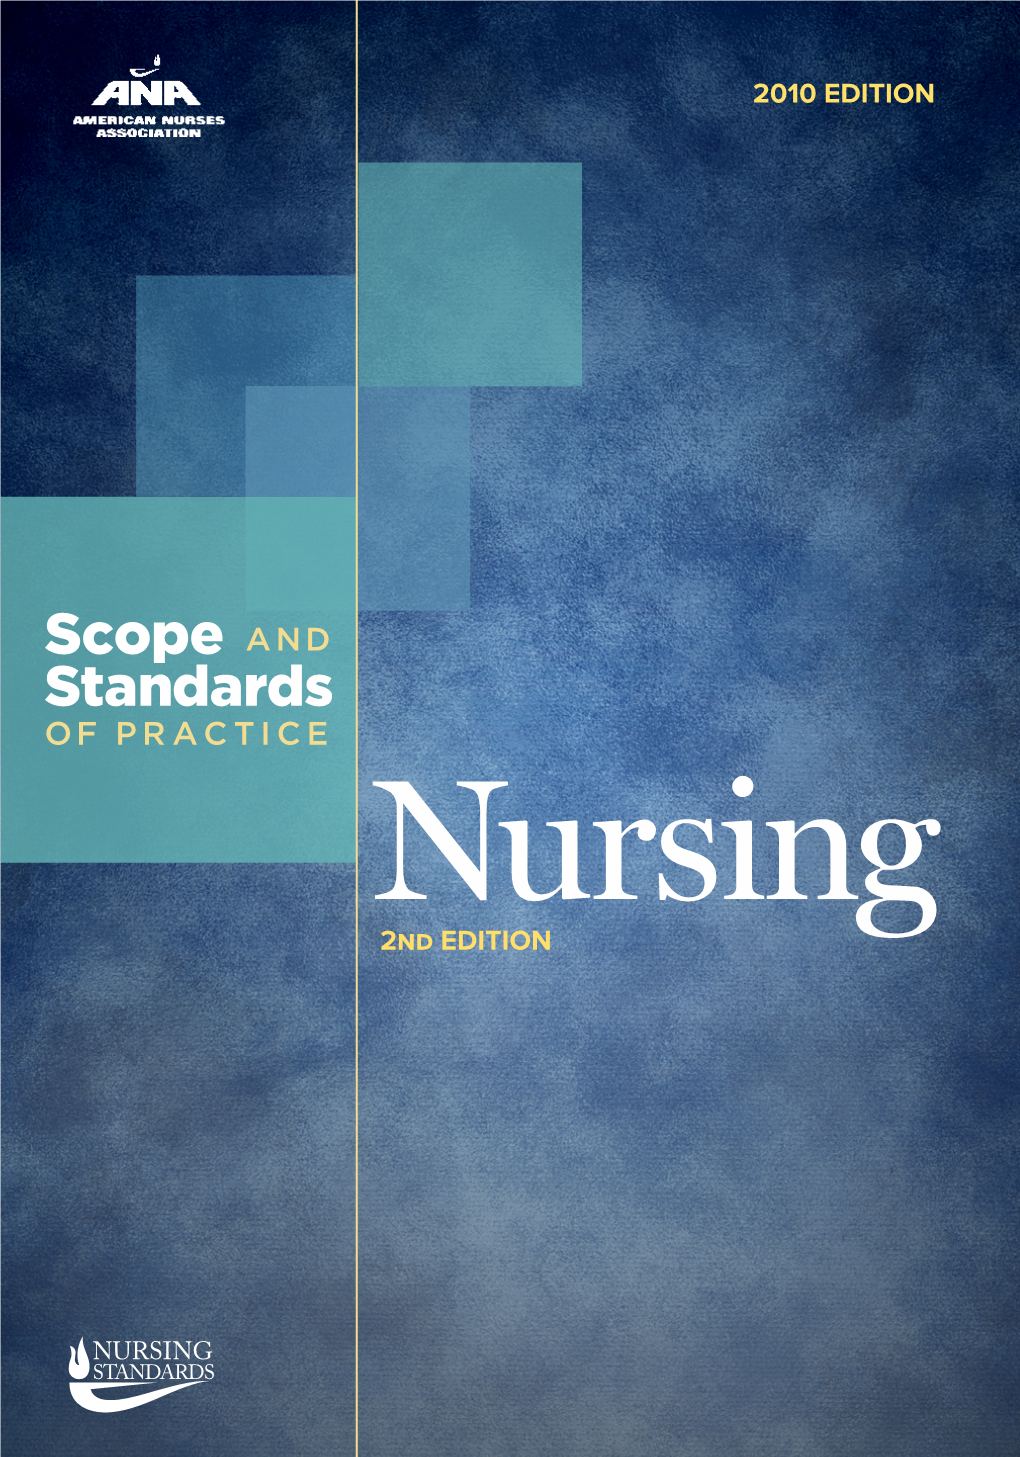 Nursing: Scope and Standards of Practice, Second Edition Guides Nurses in the Application of Their Professional Skills and Responsibilities